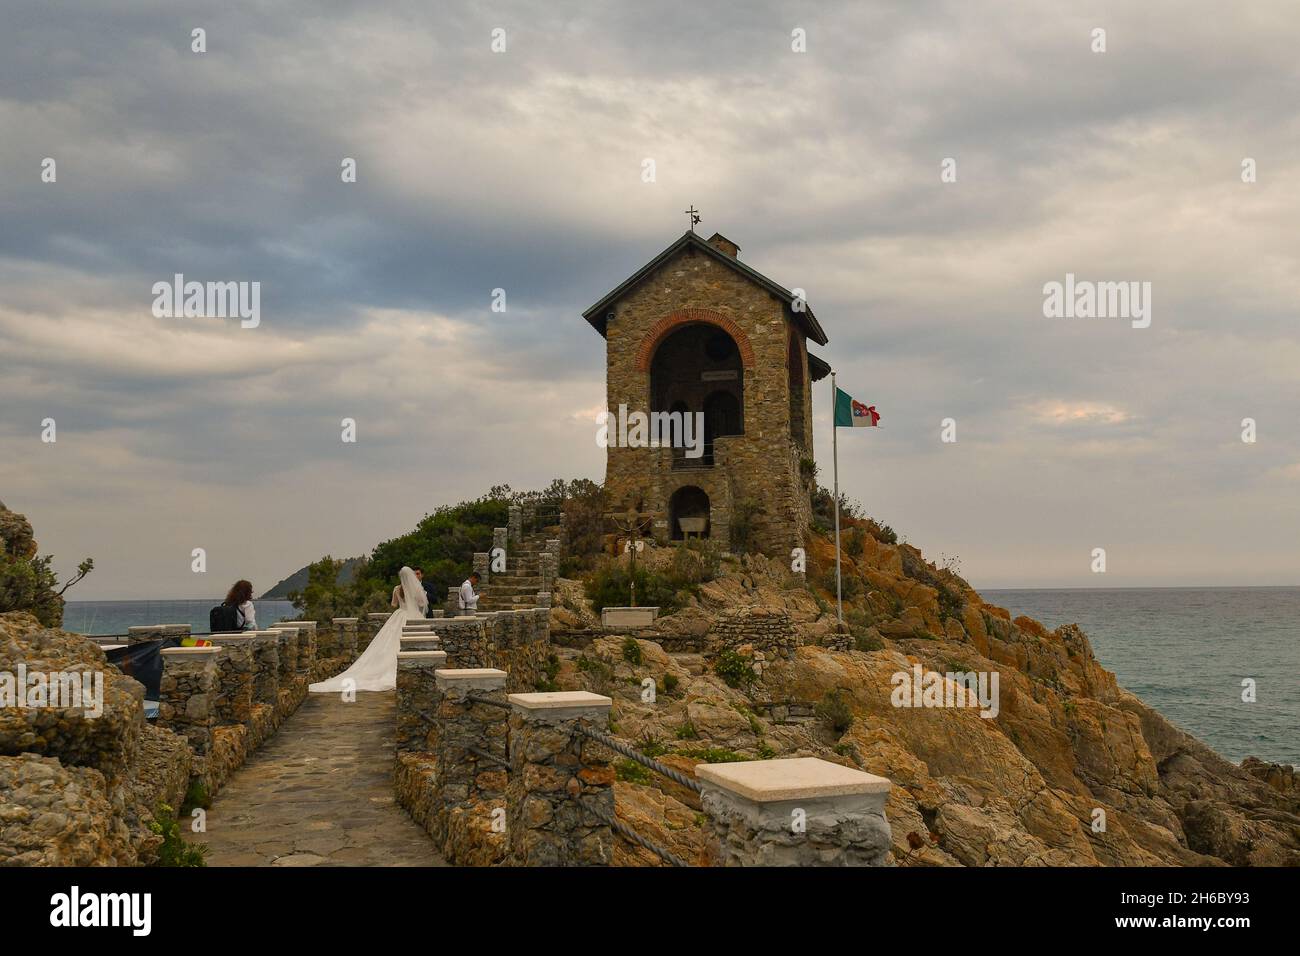 A newly married couple during the wedding photo shoot at the Chapel of Alassio, located on a cliff overlooking the sea, Savona, Liguria, Italy Stock Photo